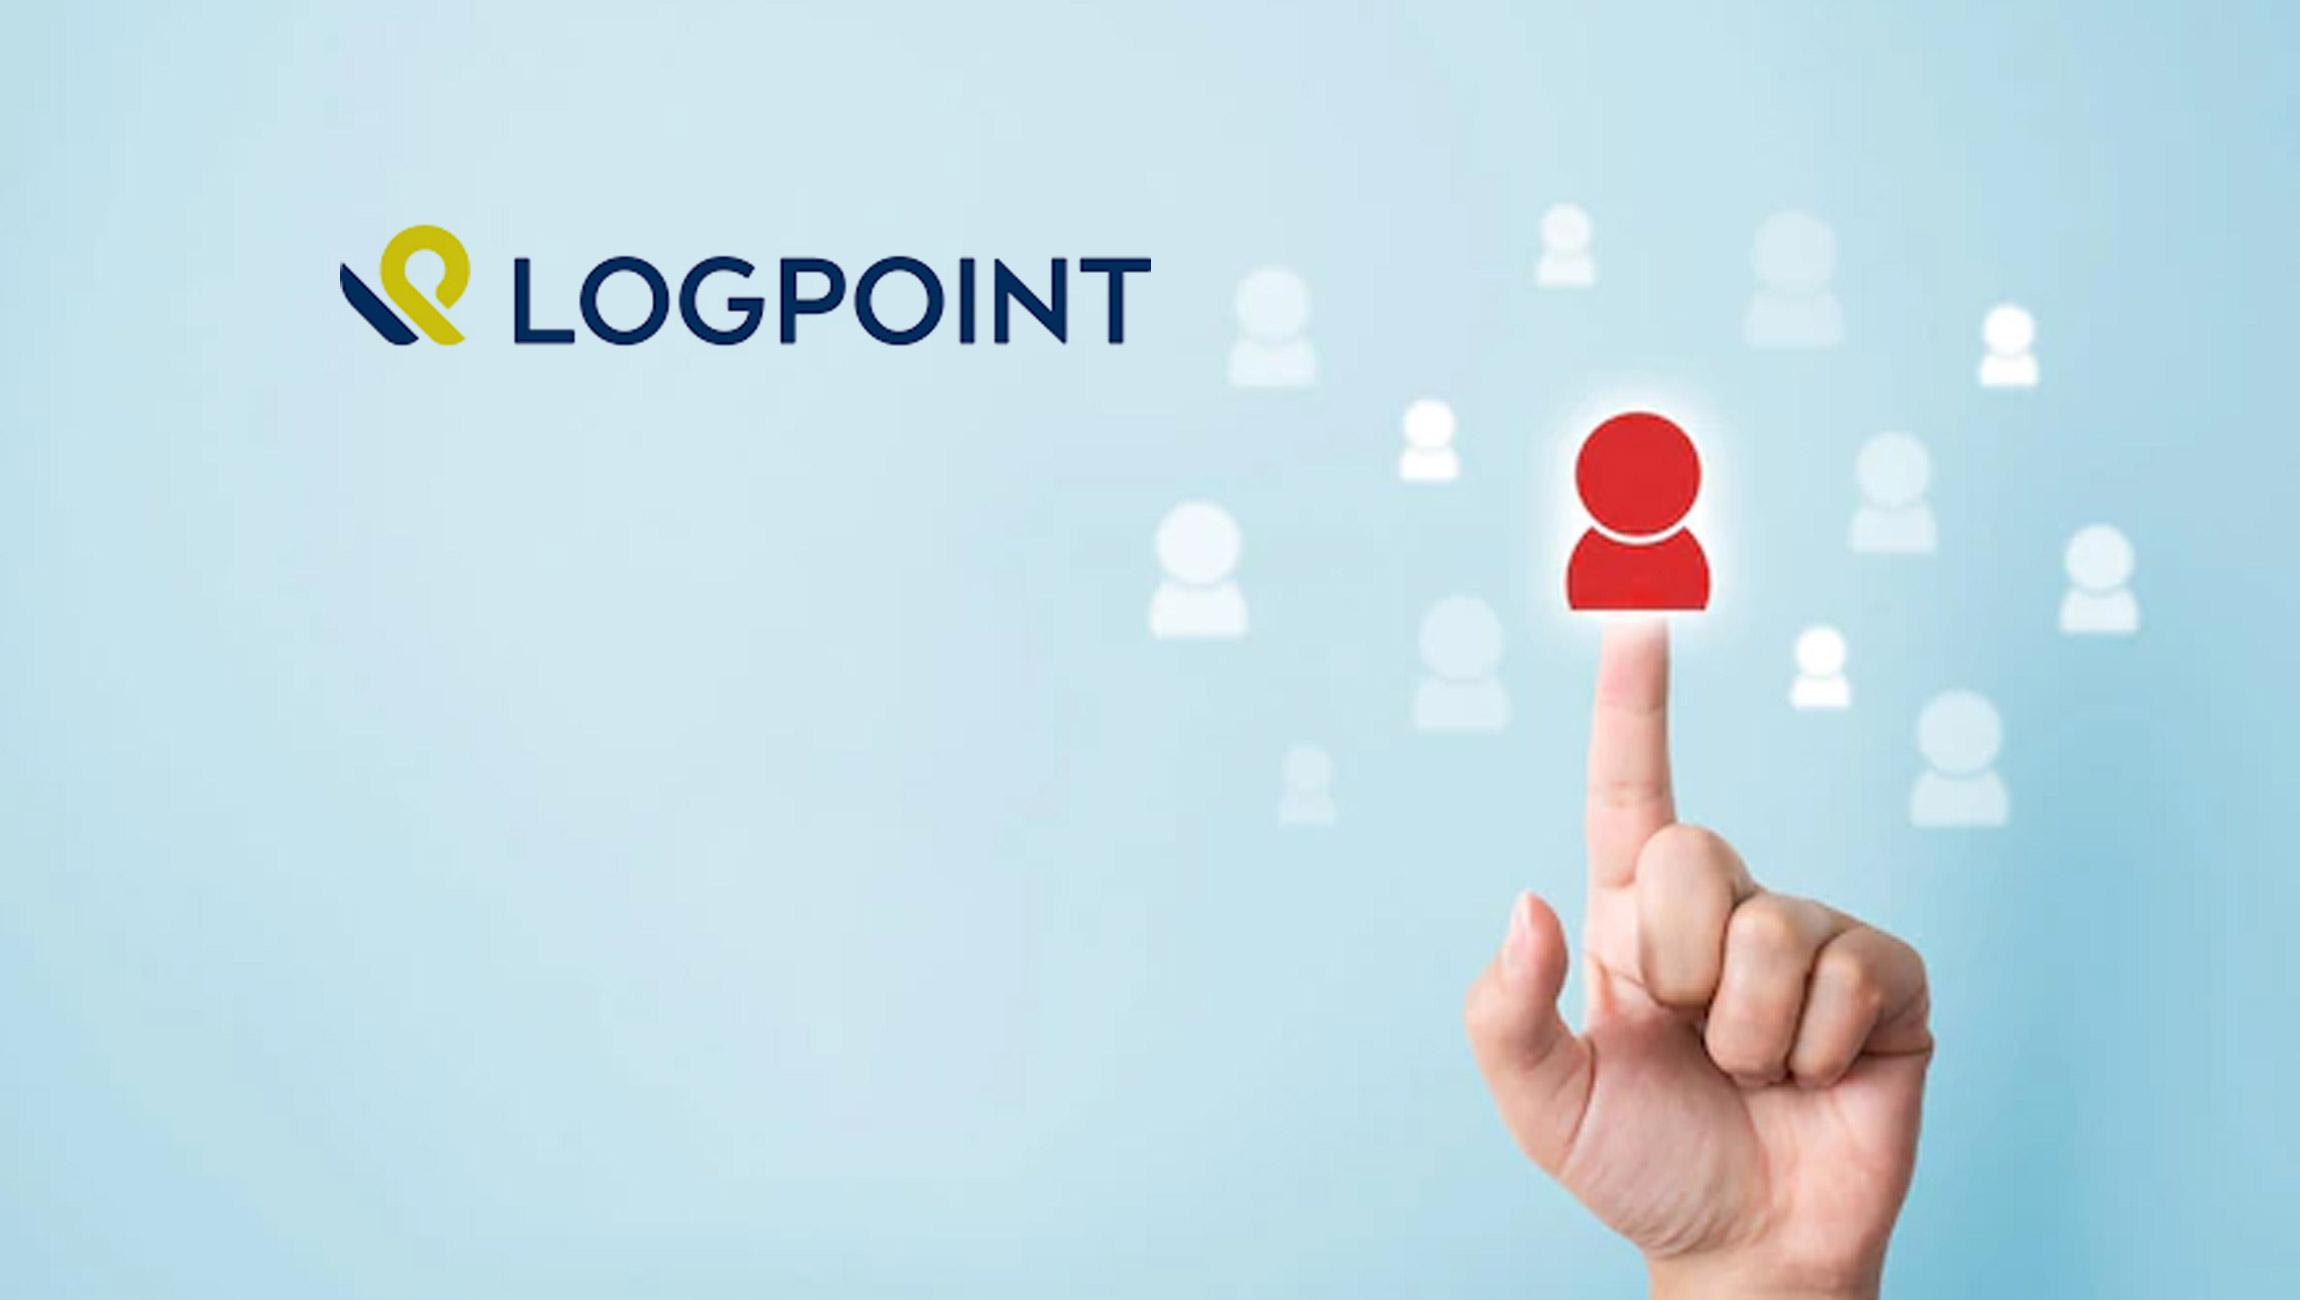 John Little joins Logpoint as Chief Financial Officer